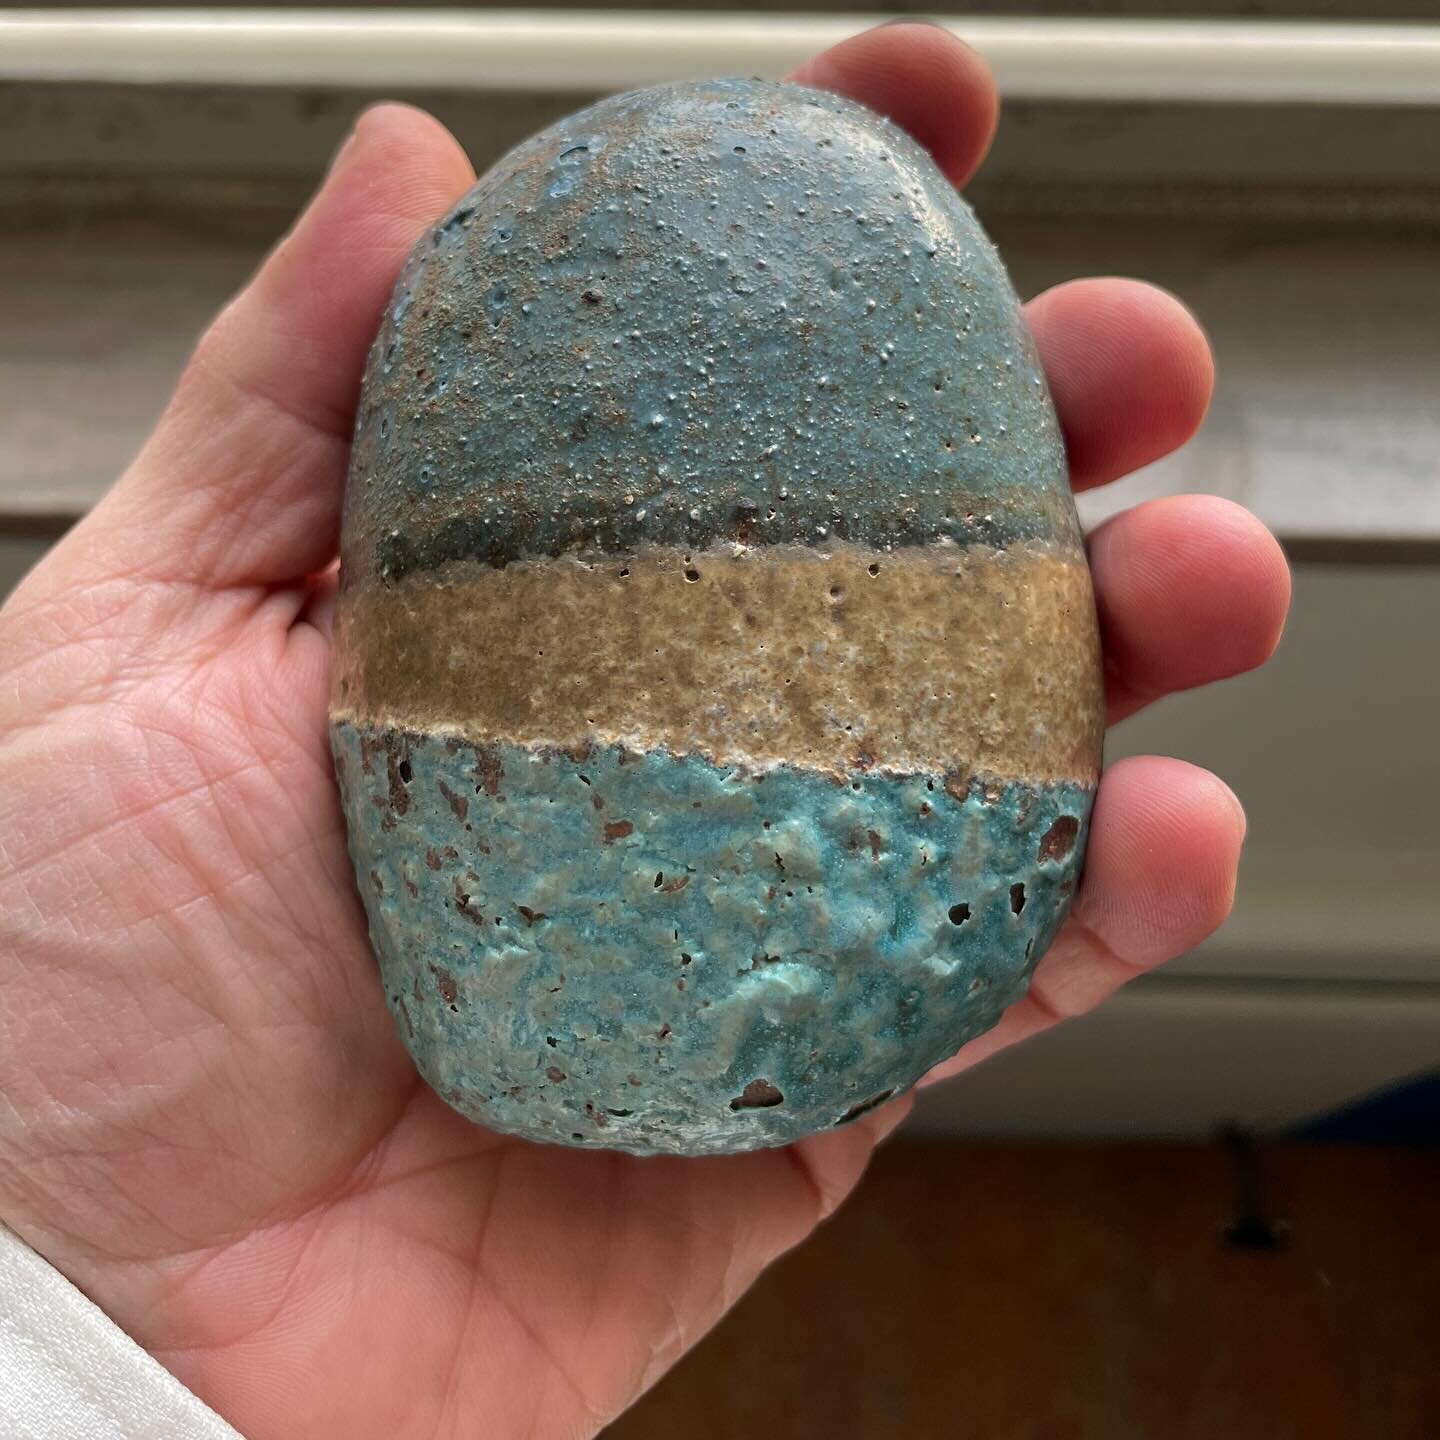 Cleveland art hive mind: this is a hollow ceramic &ldquo;pebble&rdquo;, rather lightweight, with something rattling inside like a small bead by the sound of it. I suspect it&rsquo;s an art piece, and would love to learn by whom. Any bells ringing? #w